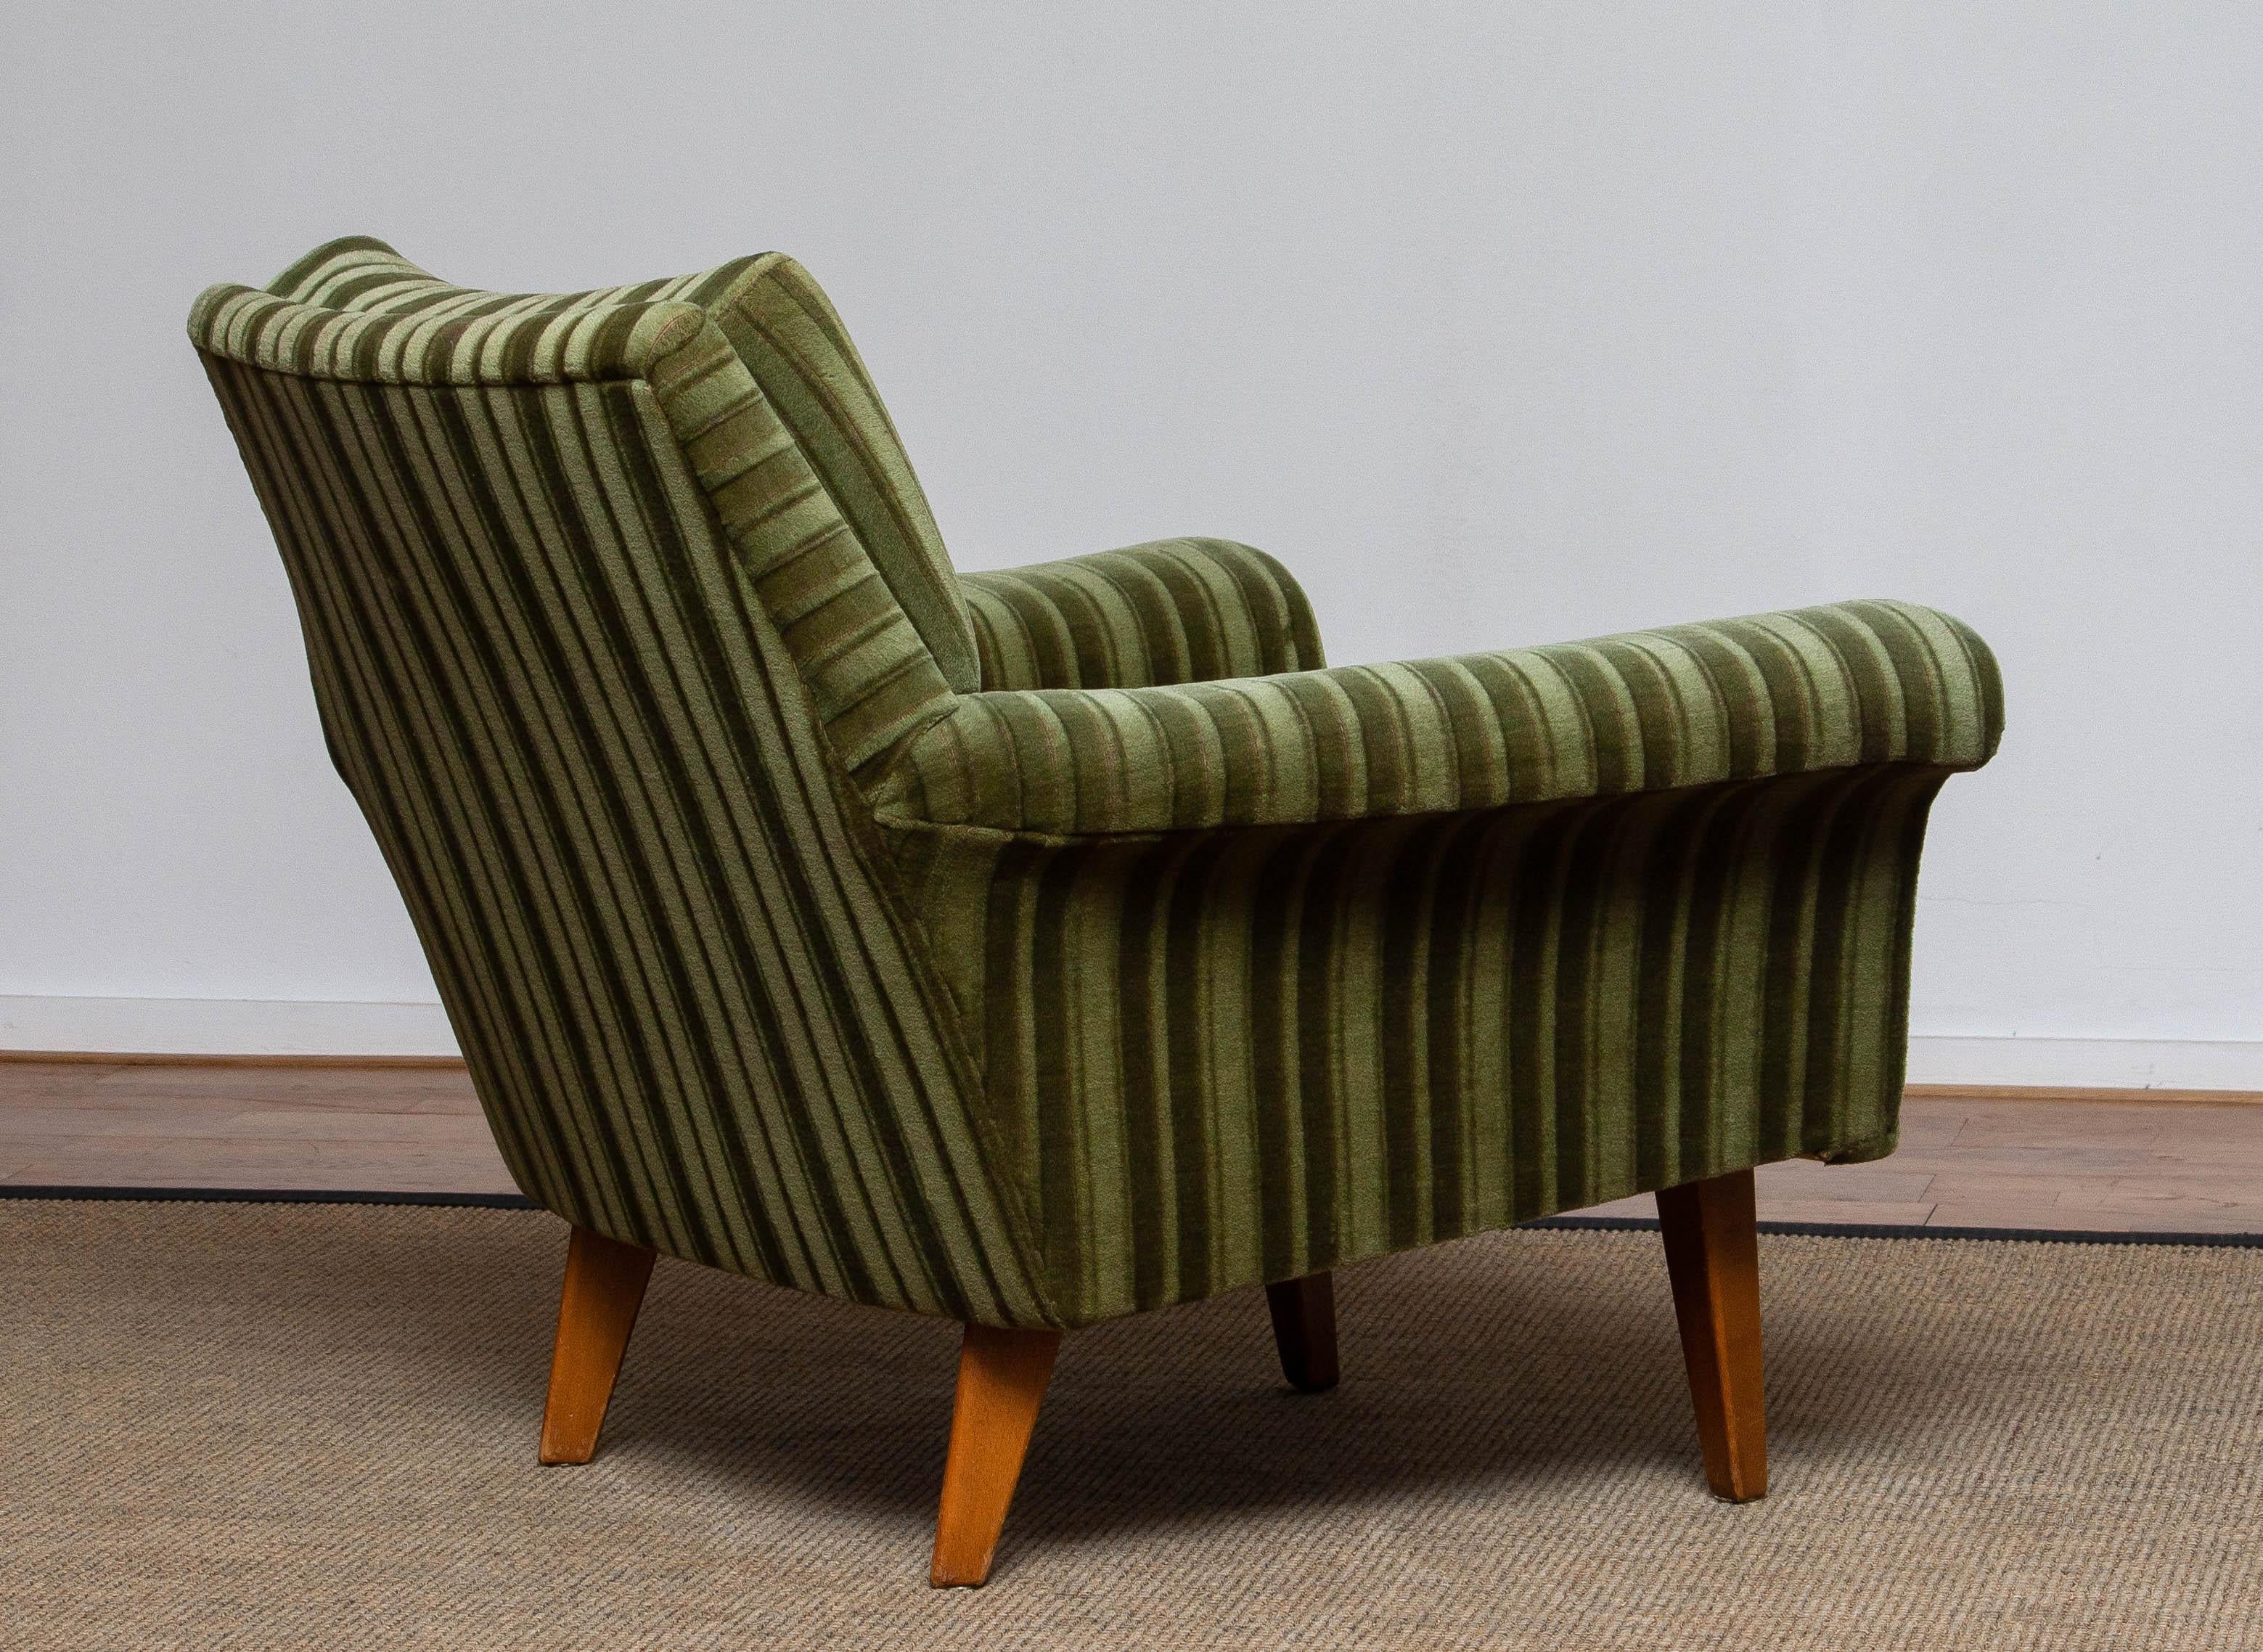 Absolutely stunning lounge / easy / club chair from the 1950's made in Italy stil upholstered with the original green velvet / velours fabric. Supports good and sits very comfortable.
Overall in very good condition.